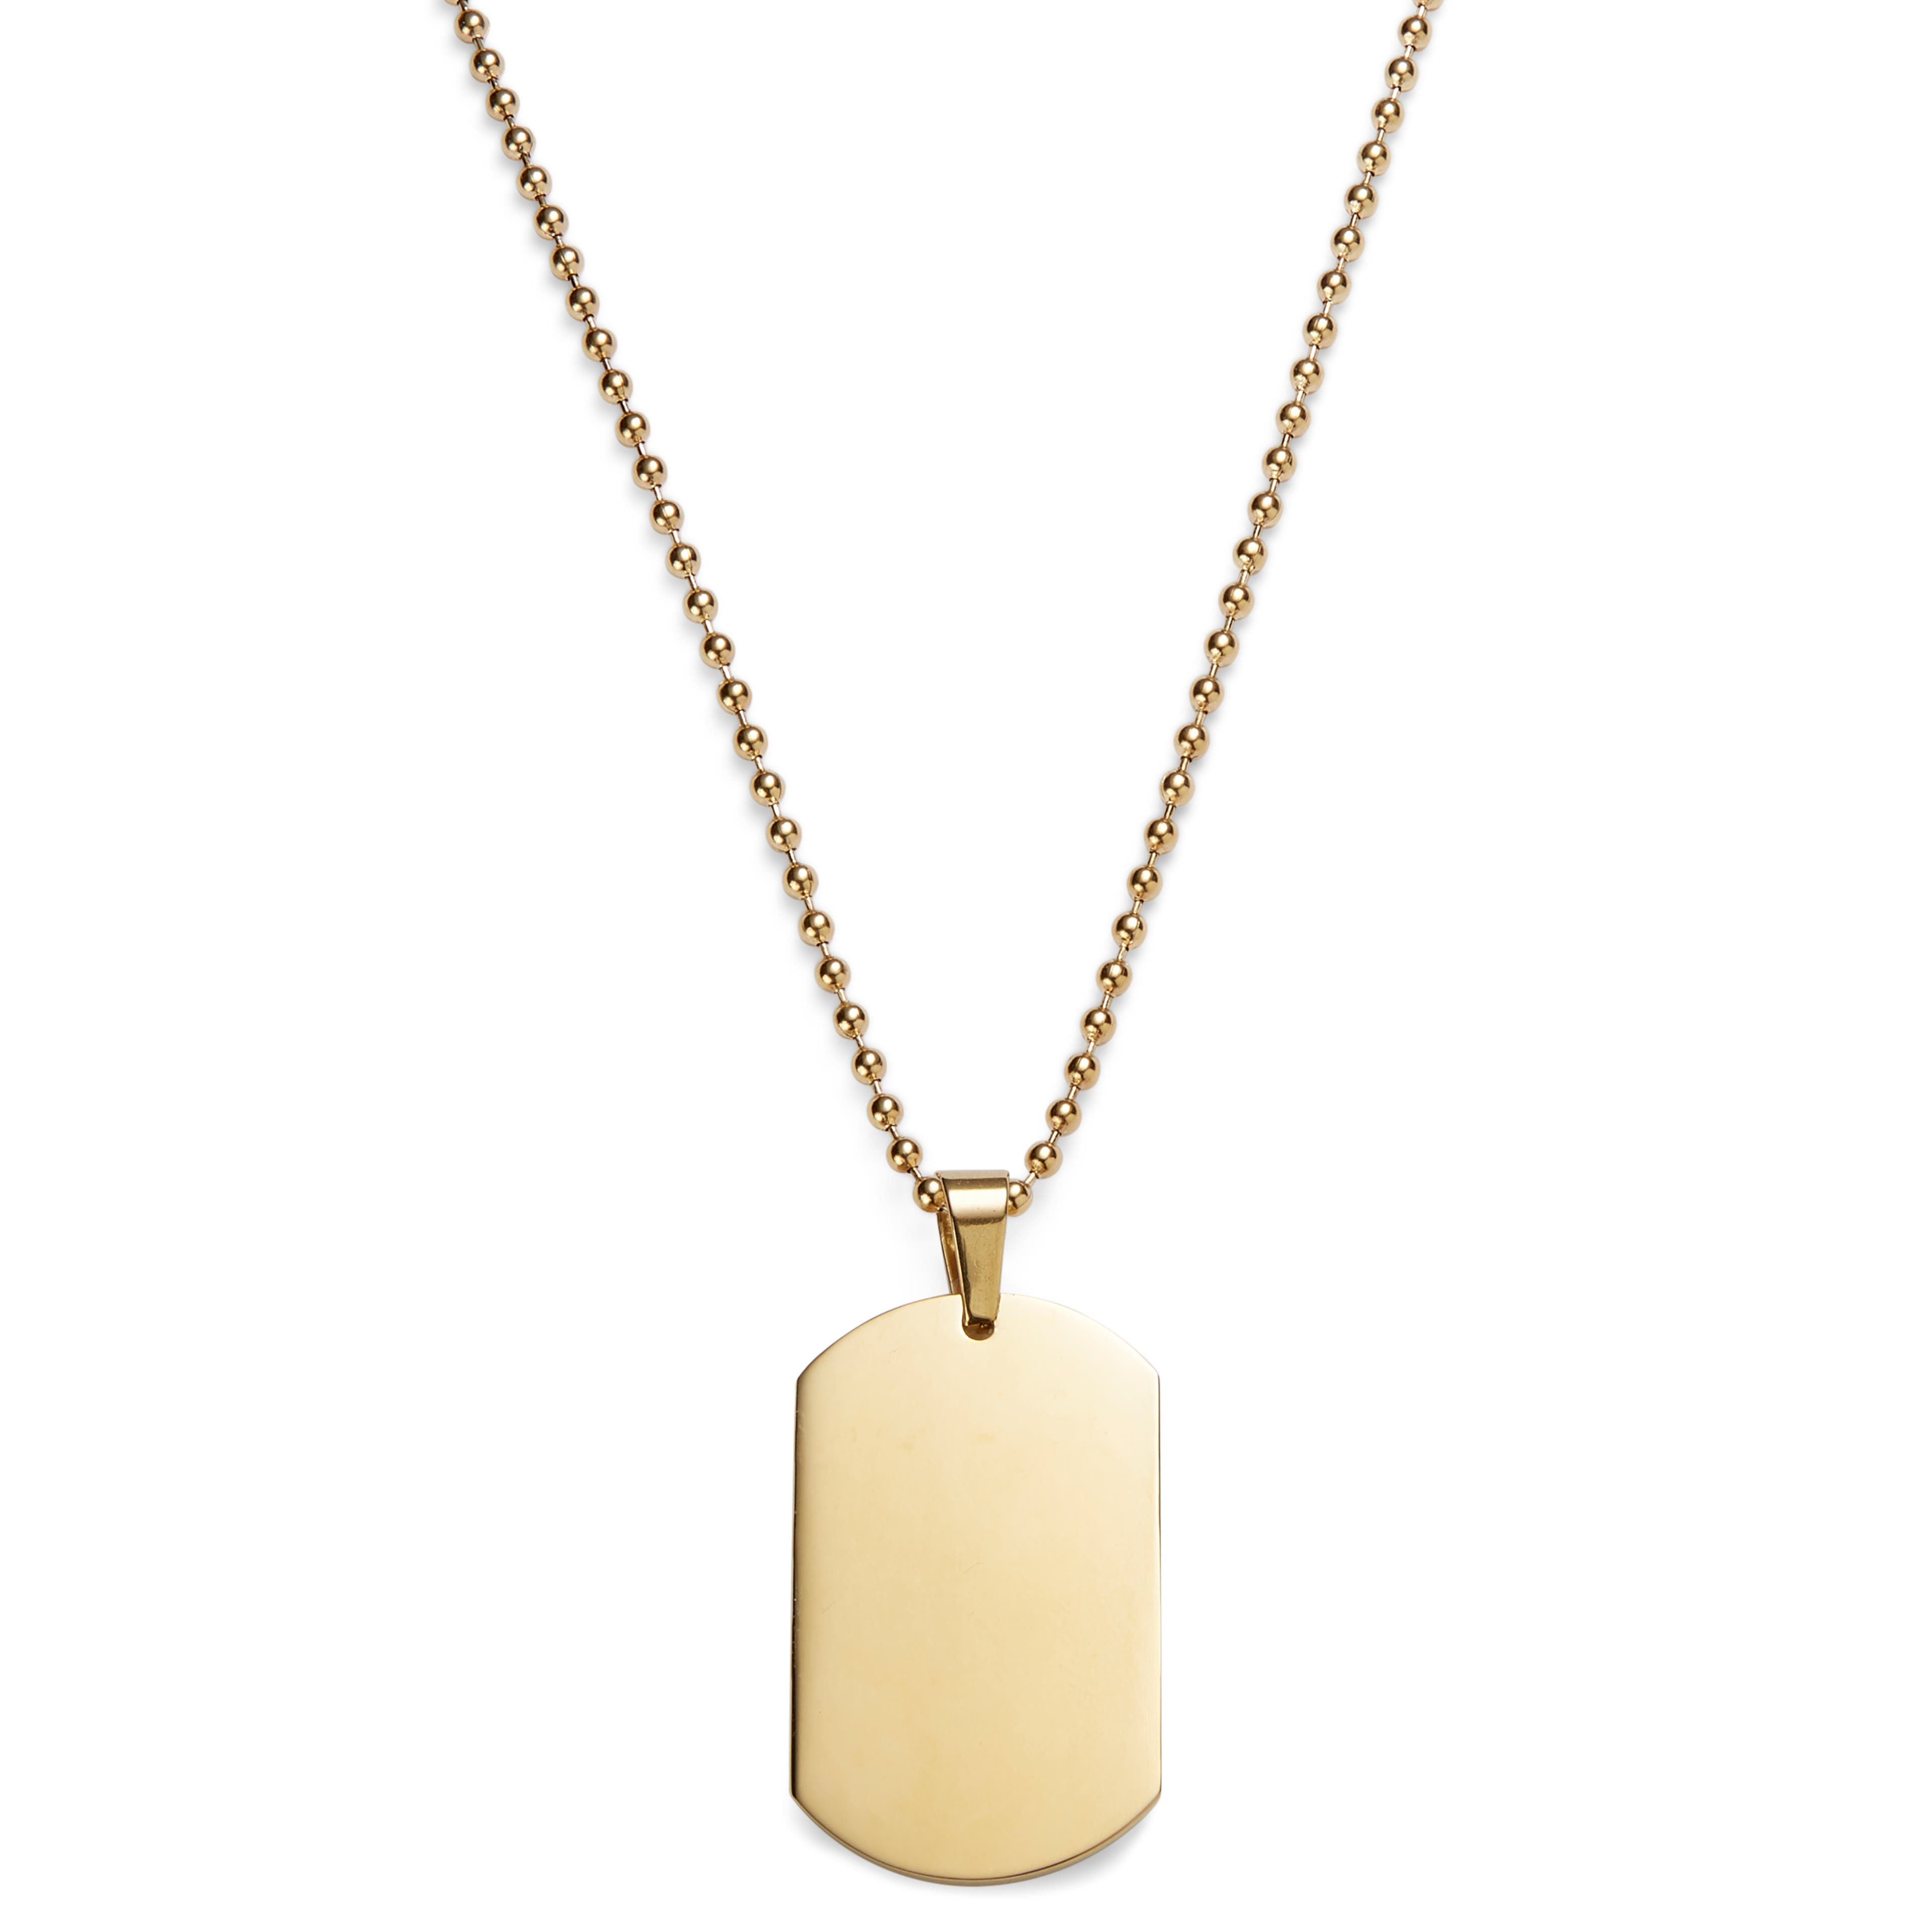 Gold-Tone Dog Tag Ball Chain Necklace